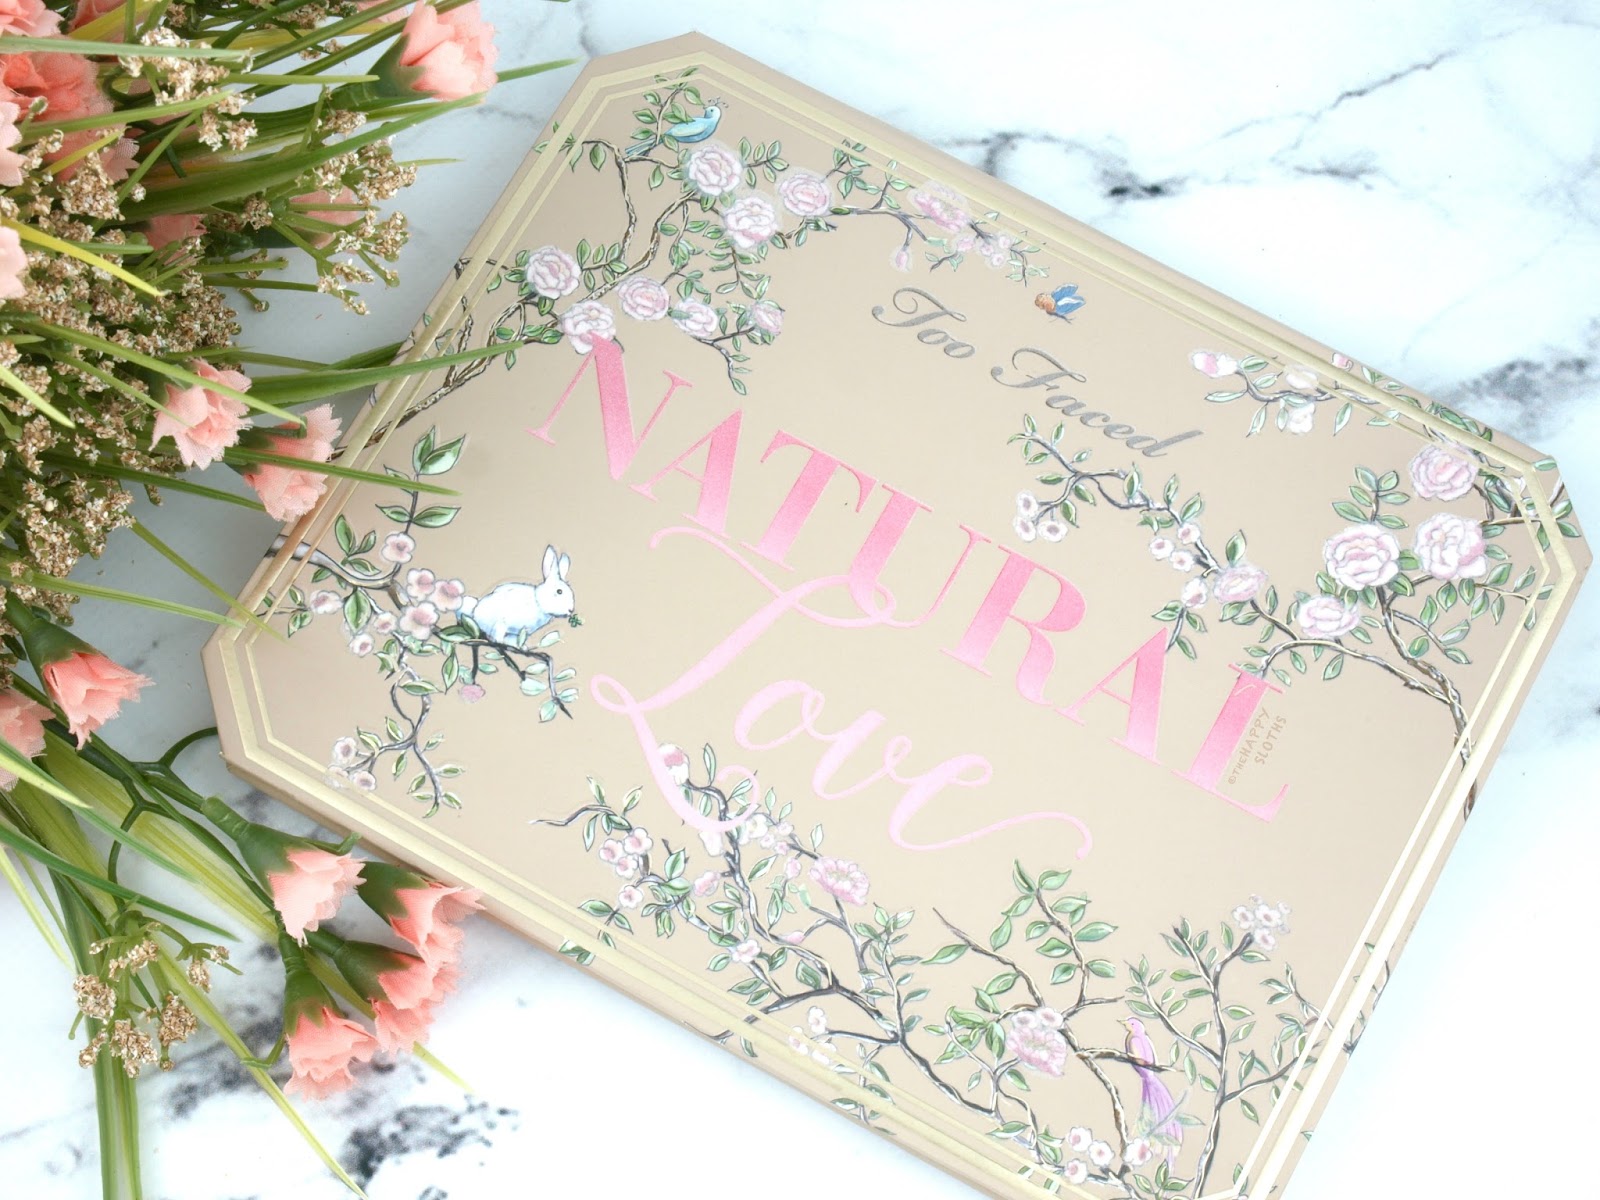 Too Faced Natural Love Palette: Review and Swatches